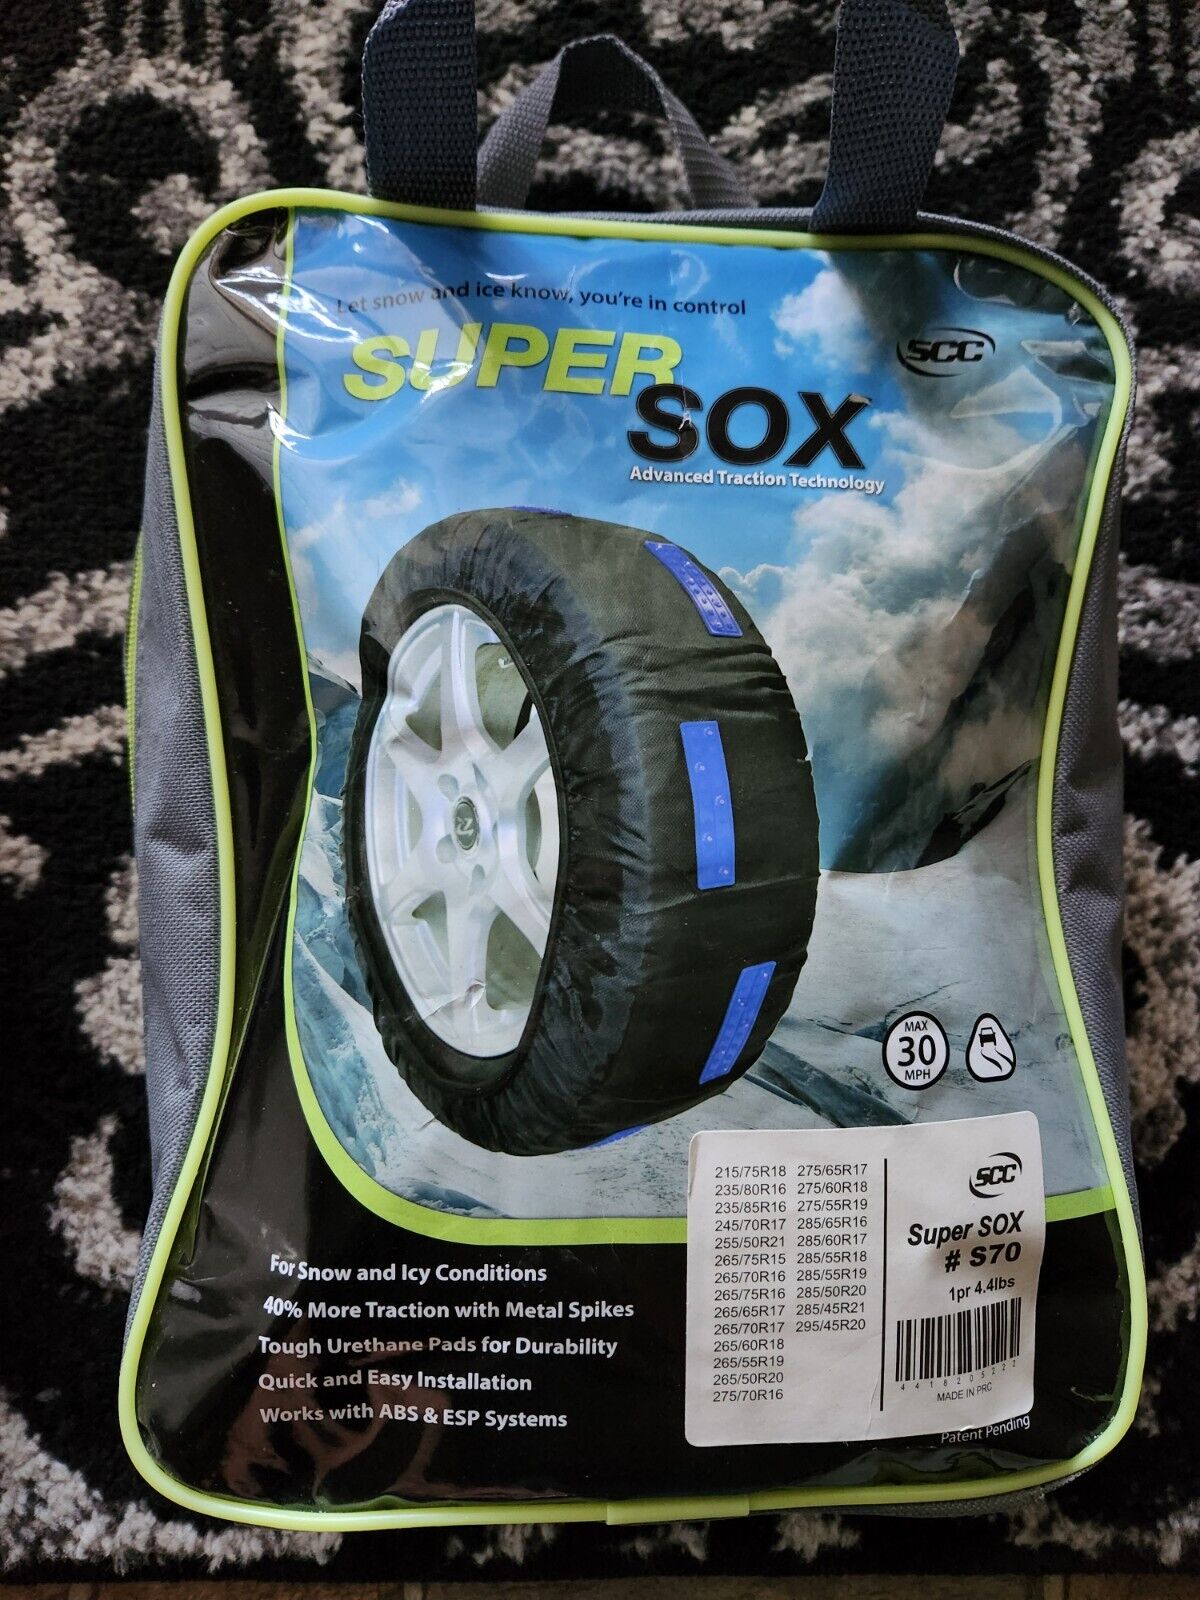 Super Sox SCC S70 Tire Traction with Reinforced Studded Urethane Pads - NEW